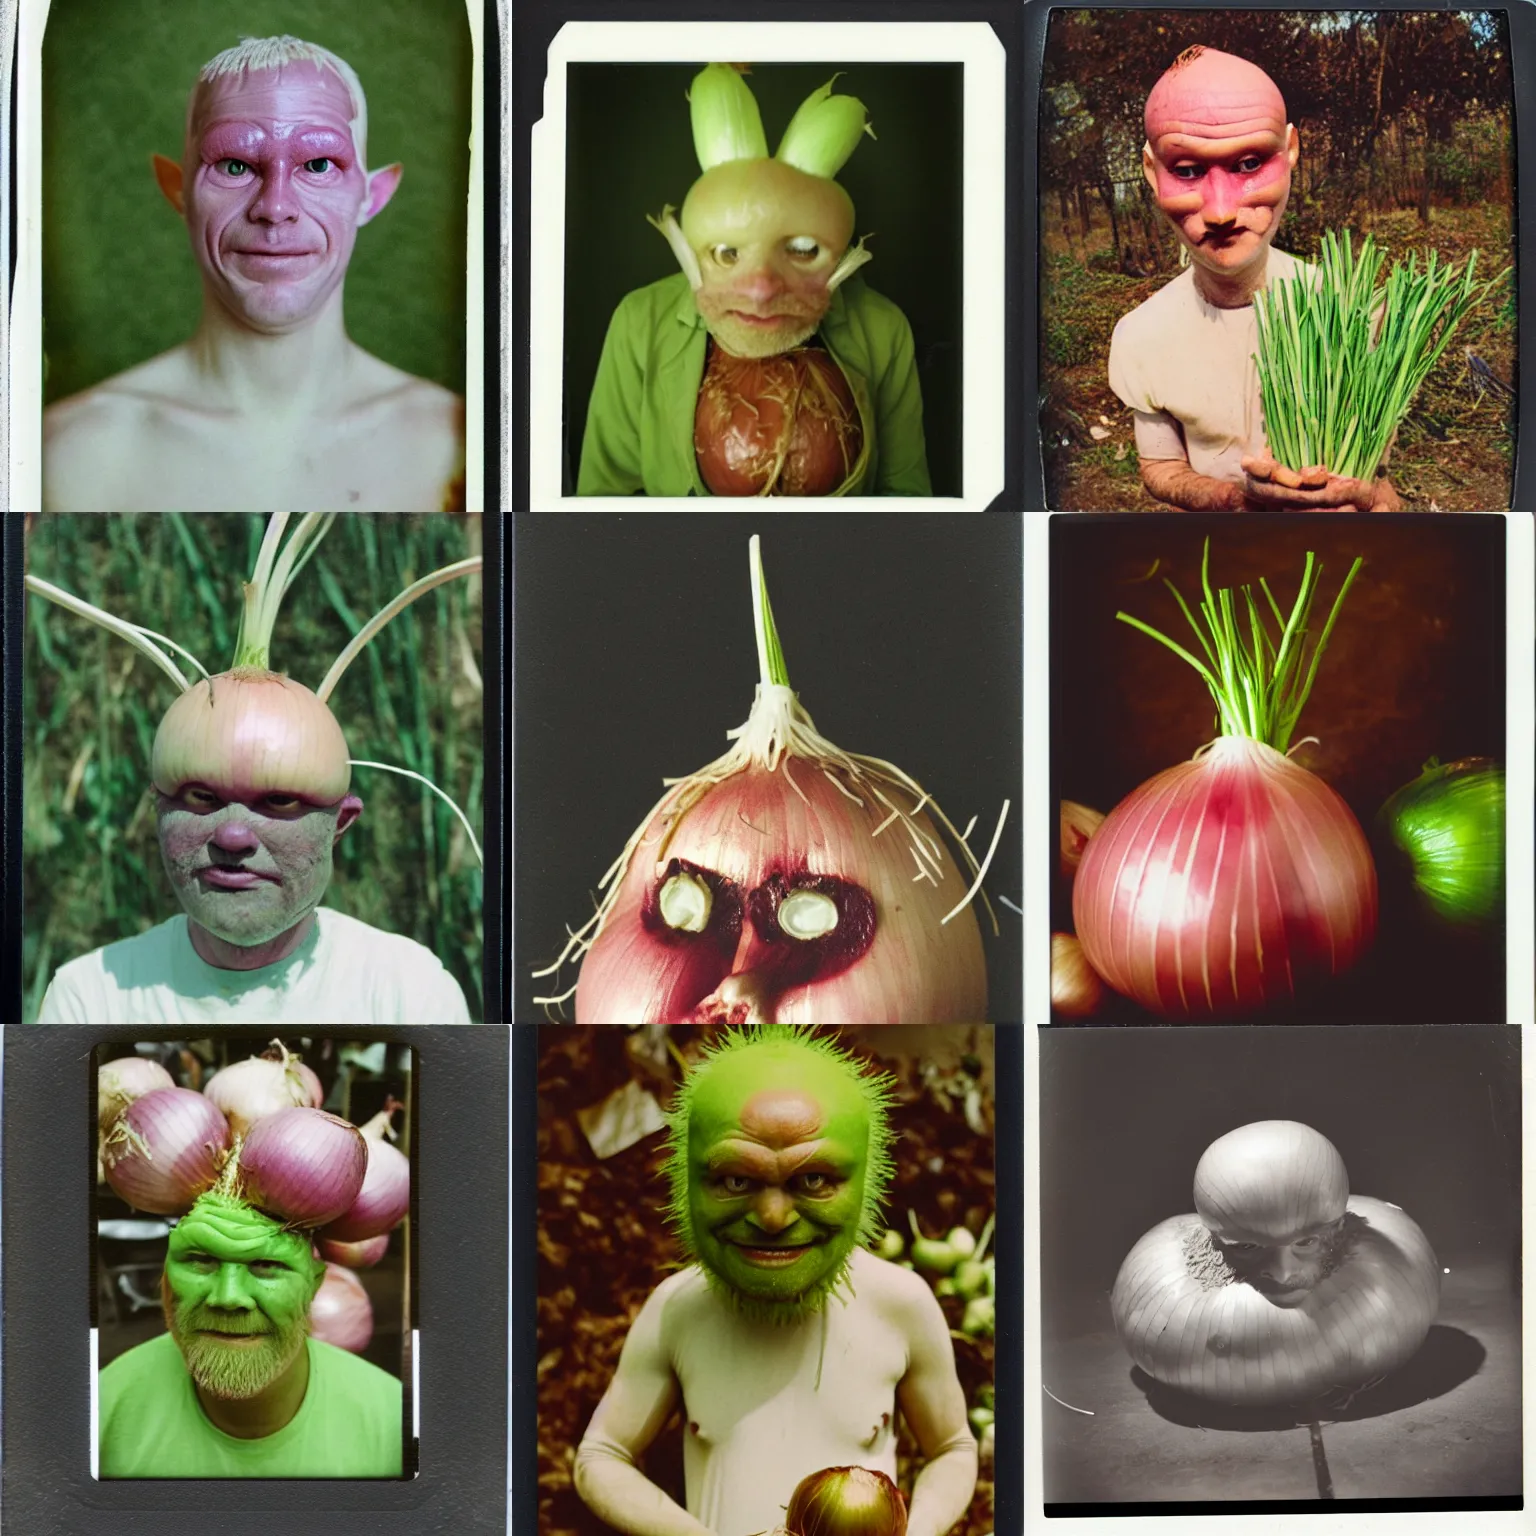 Prompt: polaroid photo of onion man, human onion hybrid, surrounded by onions and flesh